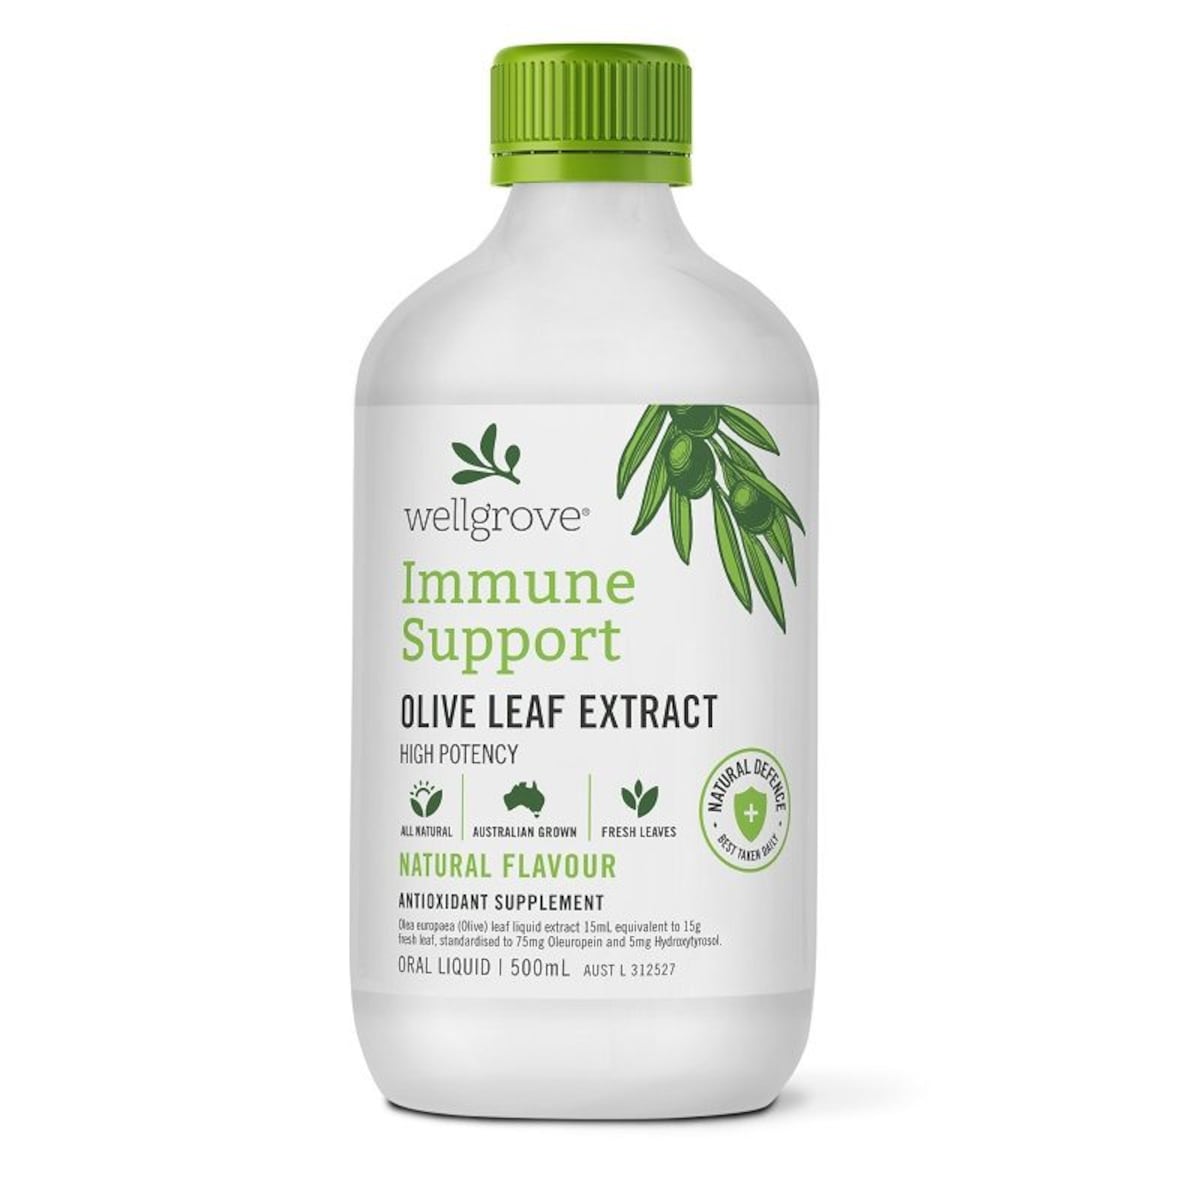 Wellgrove Olive Leaf Extract Immune Support Natural 500ml